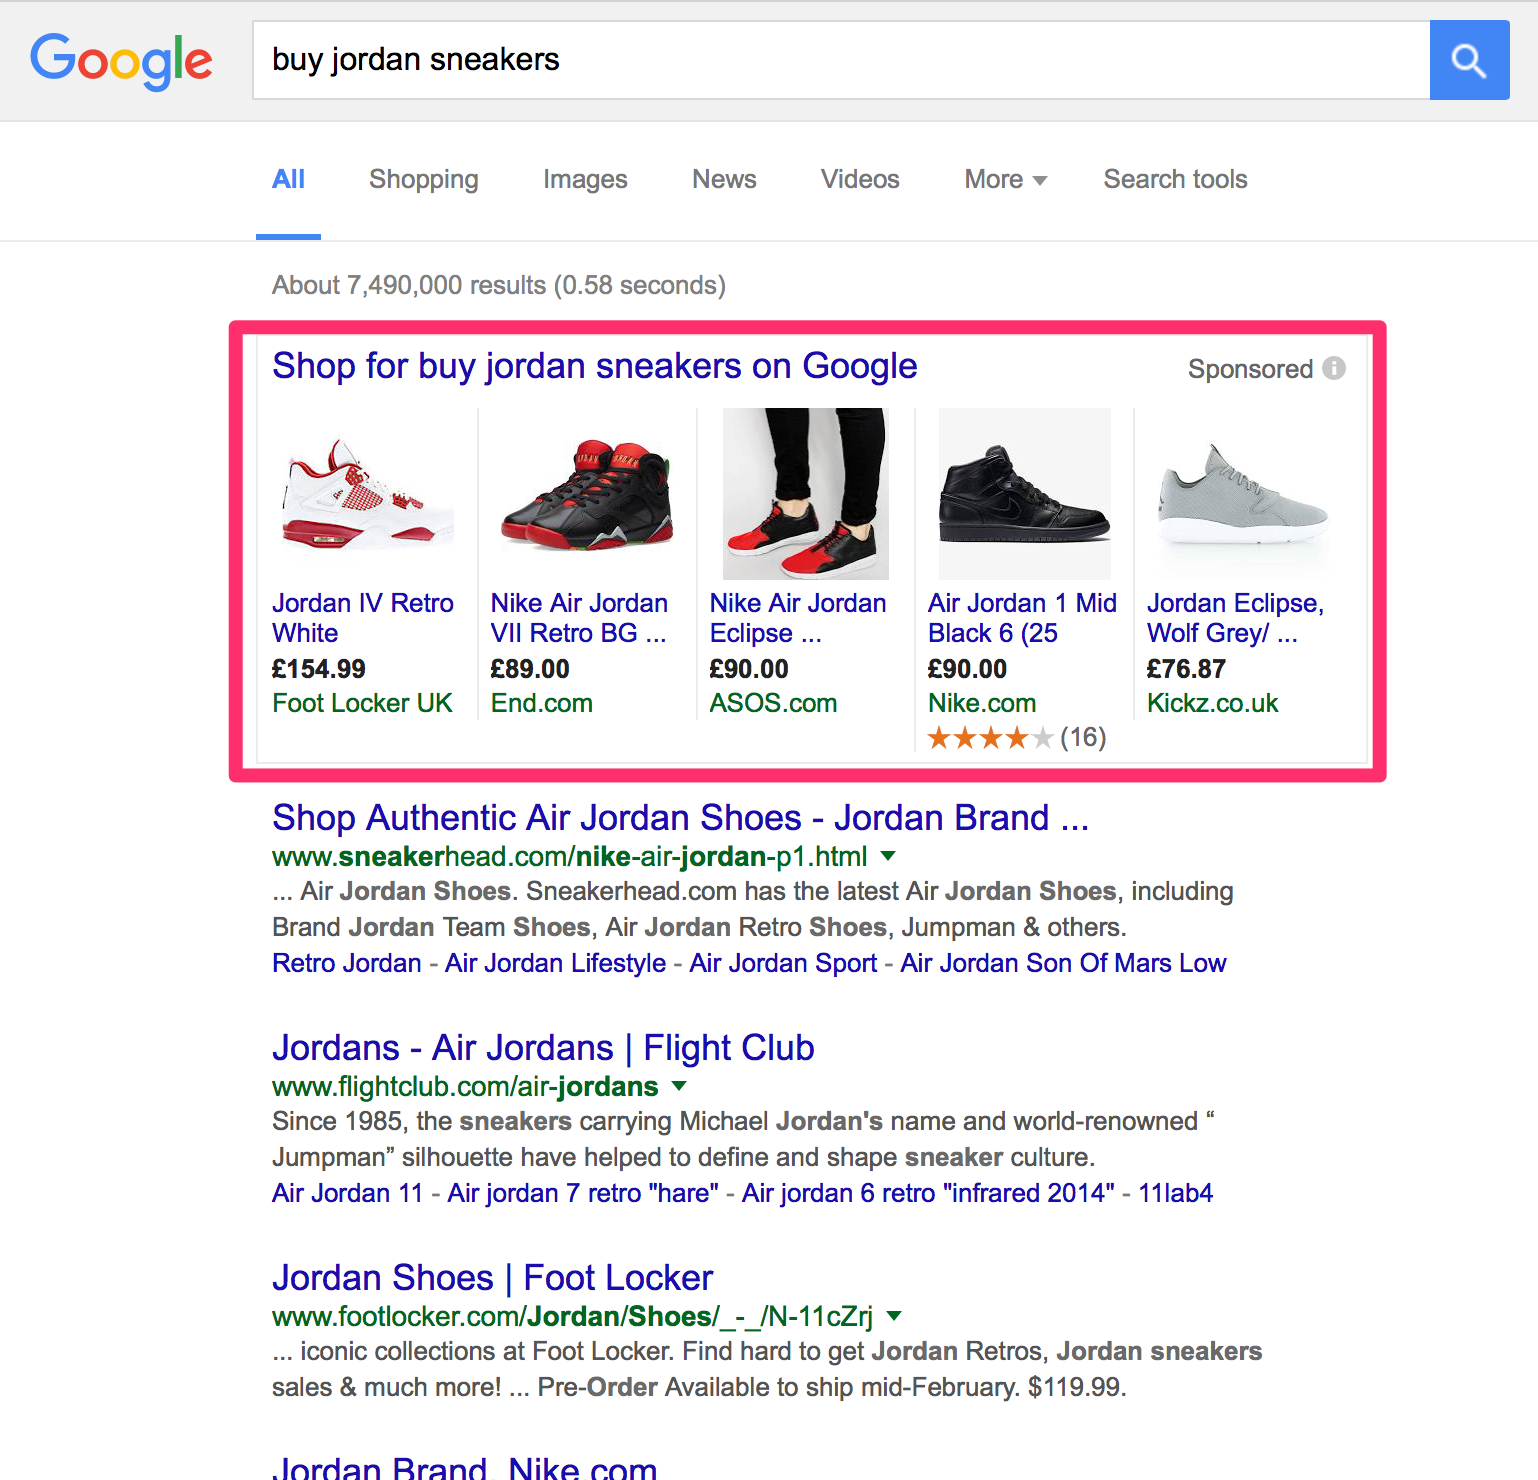 Example of PPC ads appearing in search engine results pages